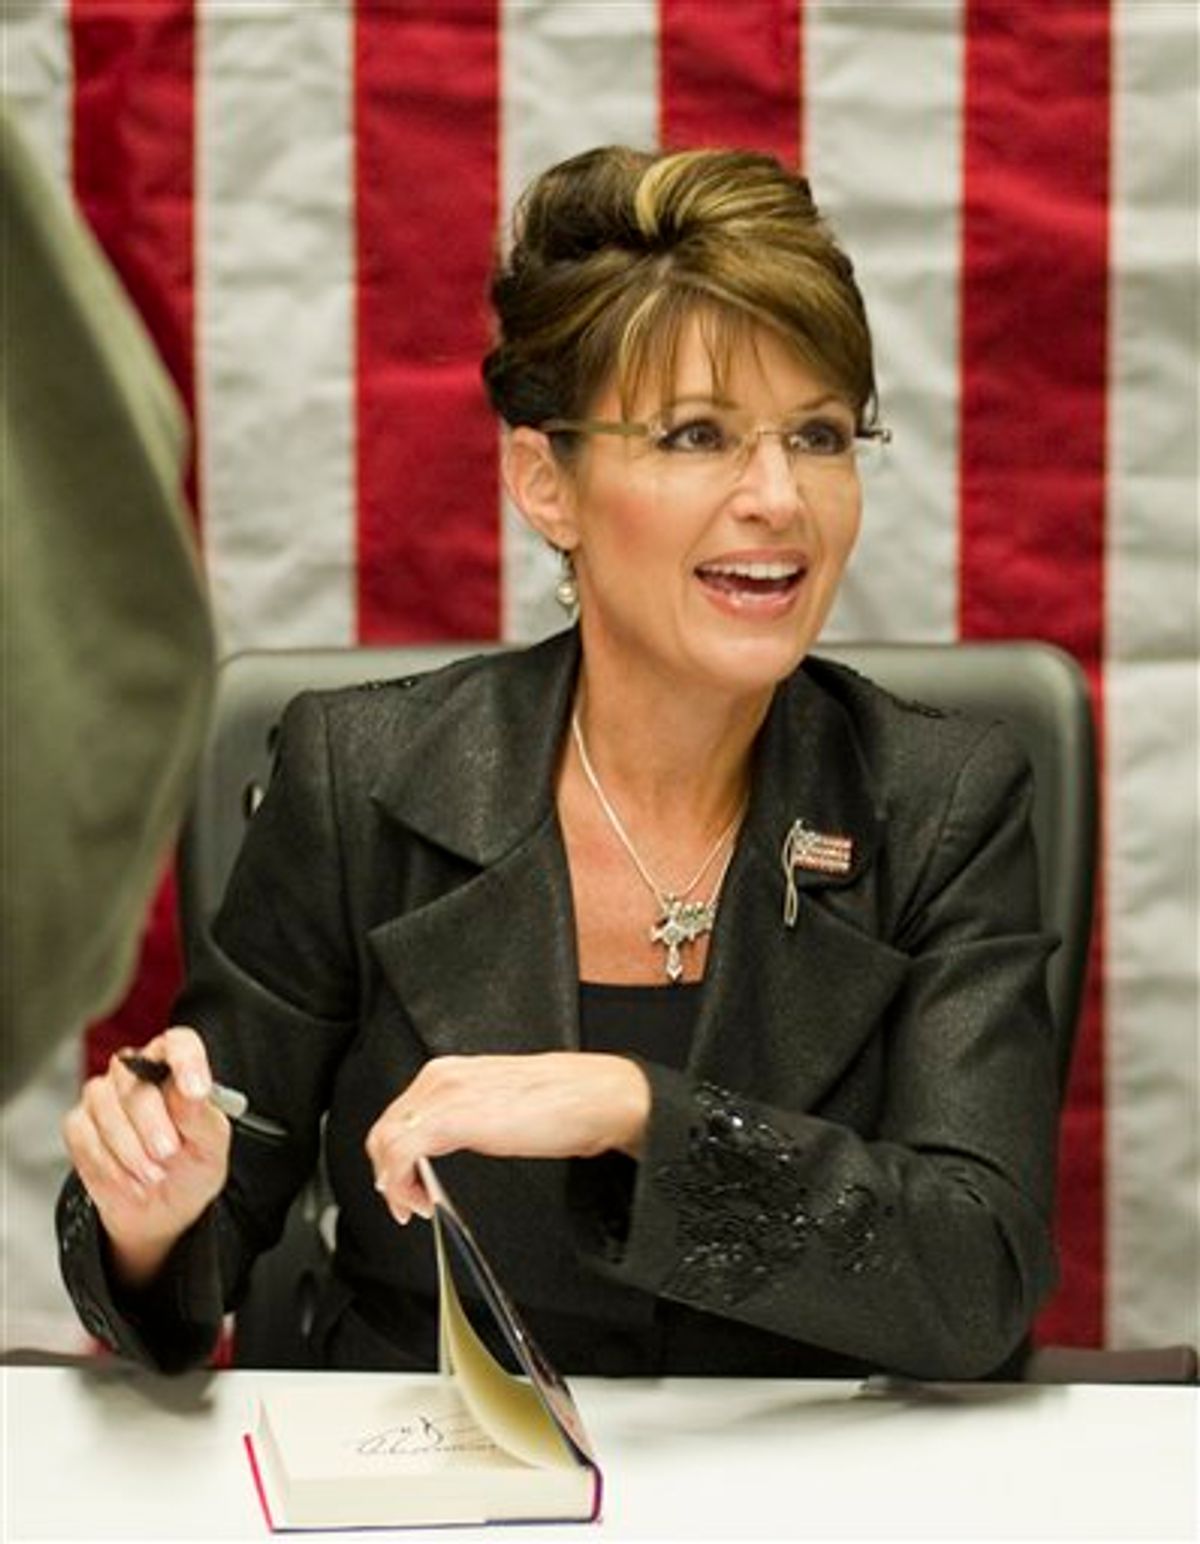 FILE - In a Nov. 30, 2010 file photo, Sarah Palin signs copies of her new book, "America By Heart," in Little Rock, Ark. Palin has posted a nearly eight-minute video on her Facebook page condemning those who blame political rhetoric for the Arizona shooting that gravely wounded U.S. Rep. Gabrielle Giffords.  In the video posted Wednesday, Dec. 12, 2010, the 2008 GOP vice presidential candidate said vigorous debates are a cherished tradition. But she said after the election, both sides find common ground, even though they disagree.  (AP Photo/Brian Chilson, File) (AP)